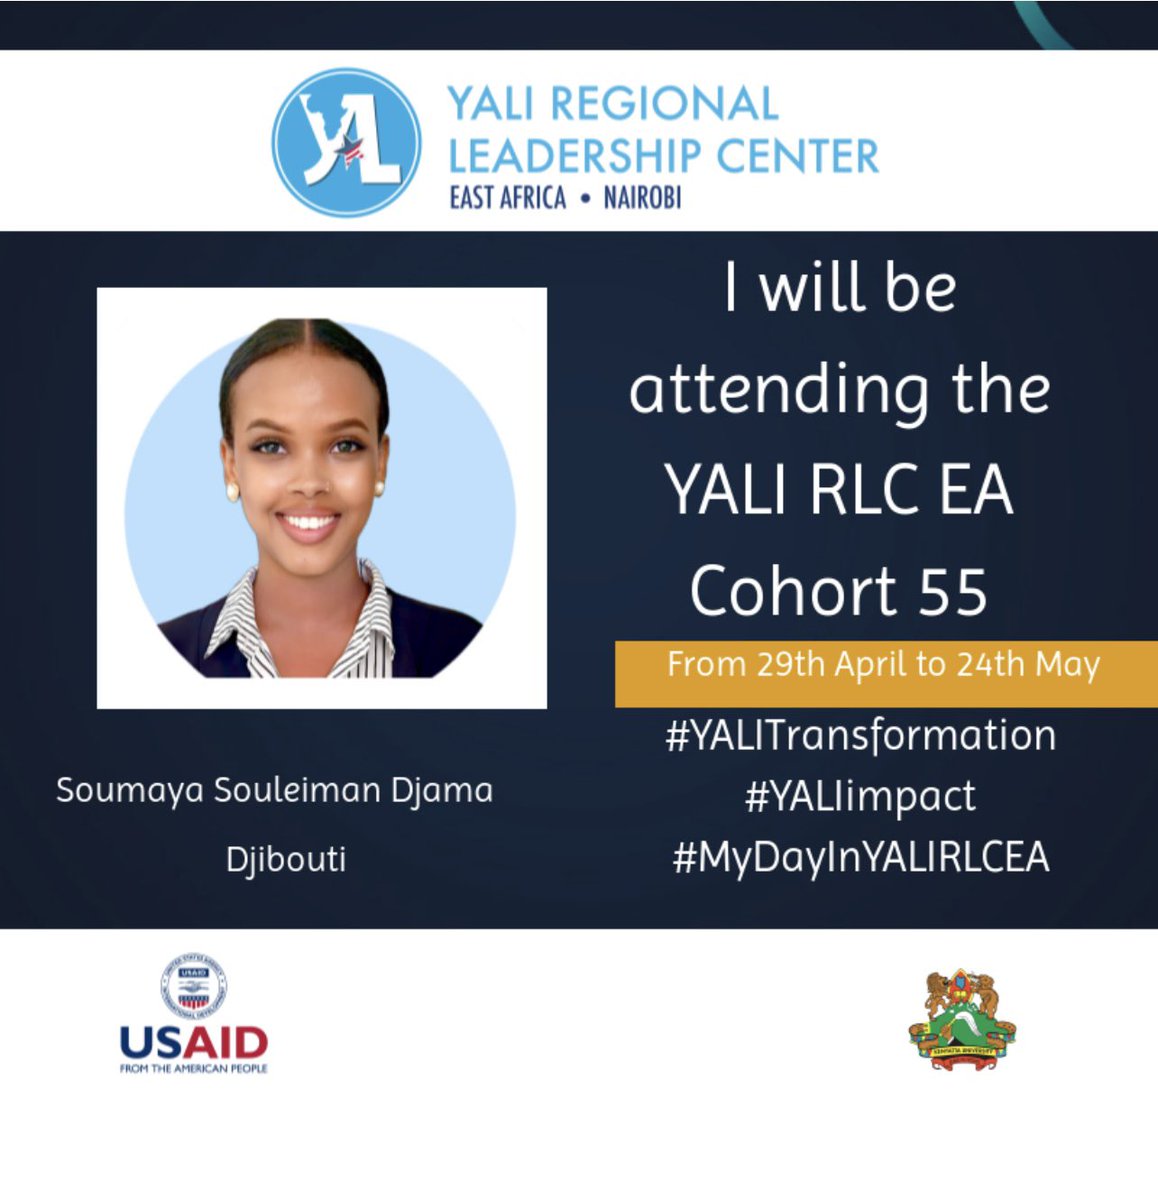 I am incredibly excited to be a part of the YALI Leadership Program Cohort 55. I eagerly anticipate joining this dynamic group of future thinkers and change-makers dedicated to Africa's progress.
#YALITransformations 
#YALIimpact
#MyDayInYALIRLCEA